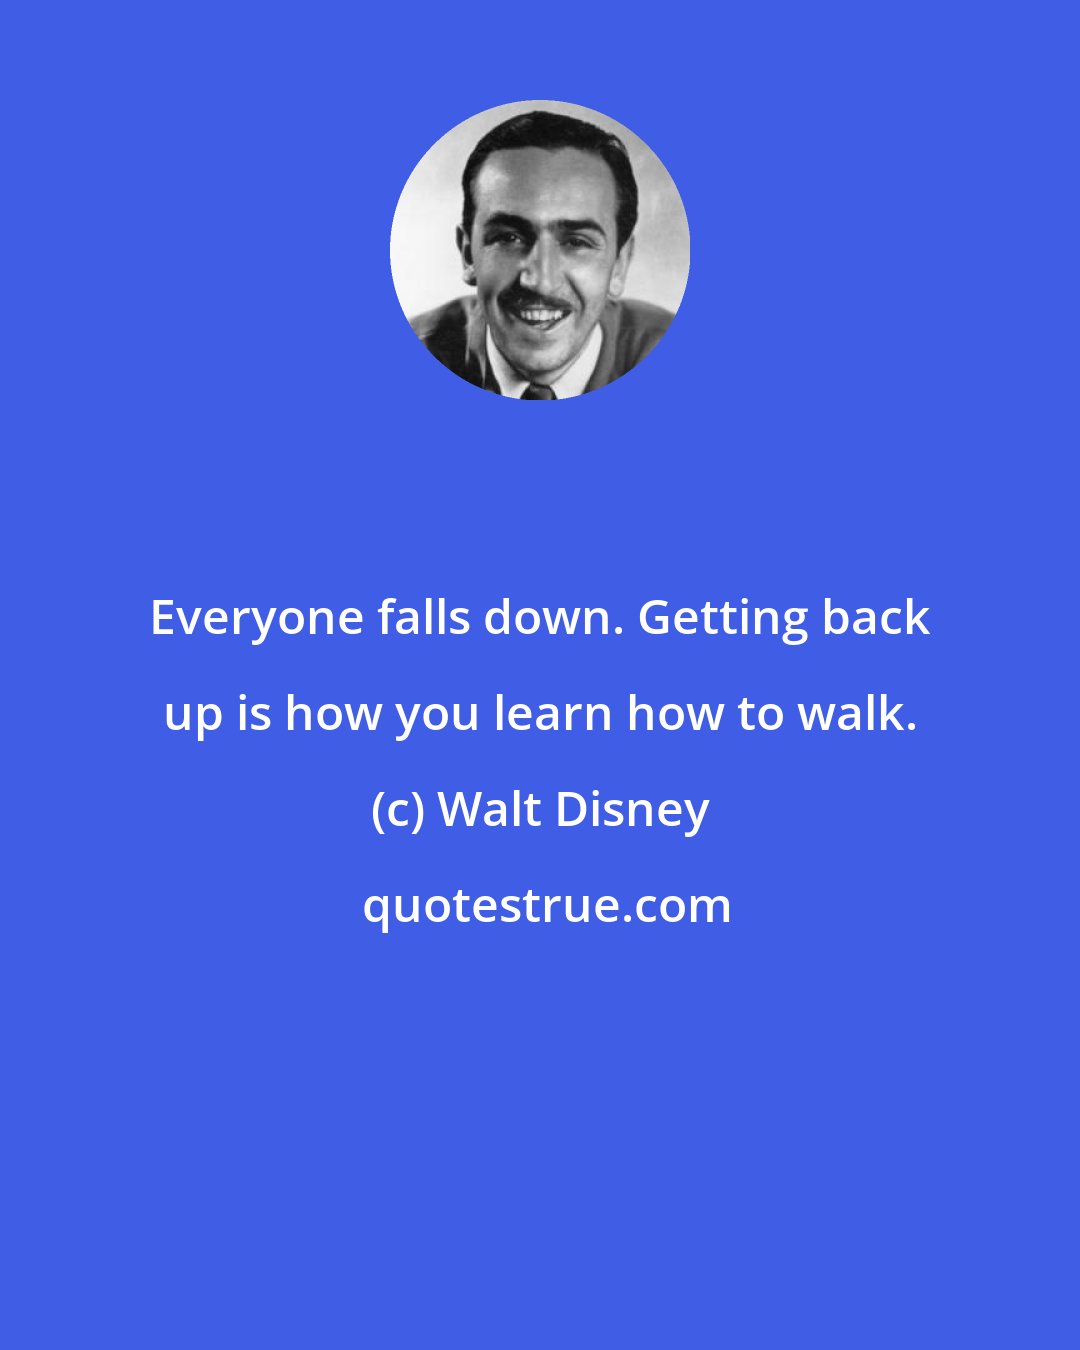 Walt Disney: Everyone falls down. Getting back up is how you learn how to walk.